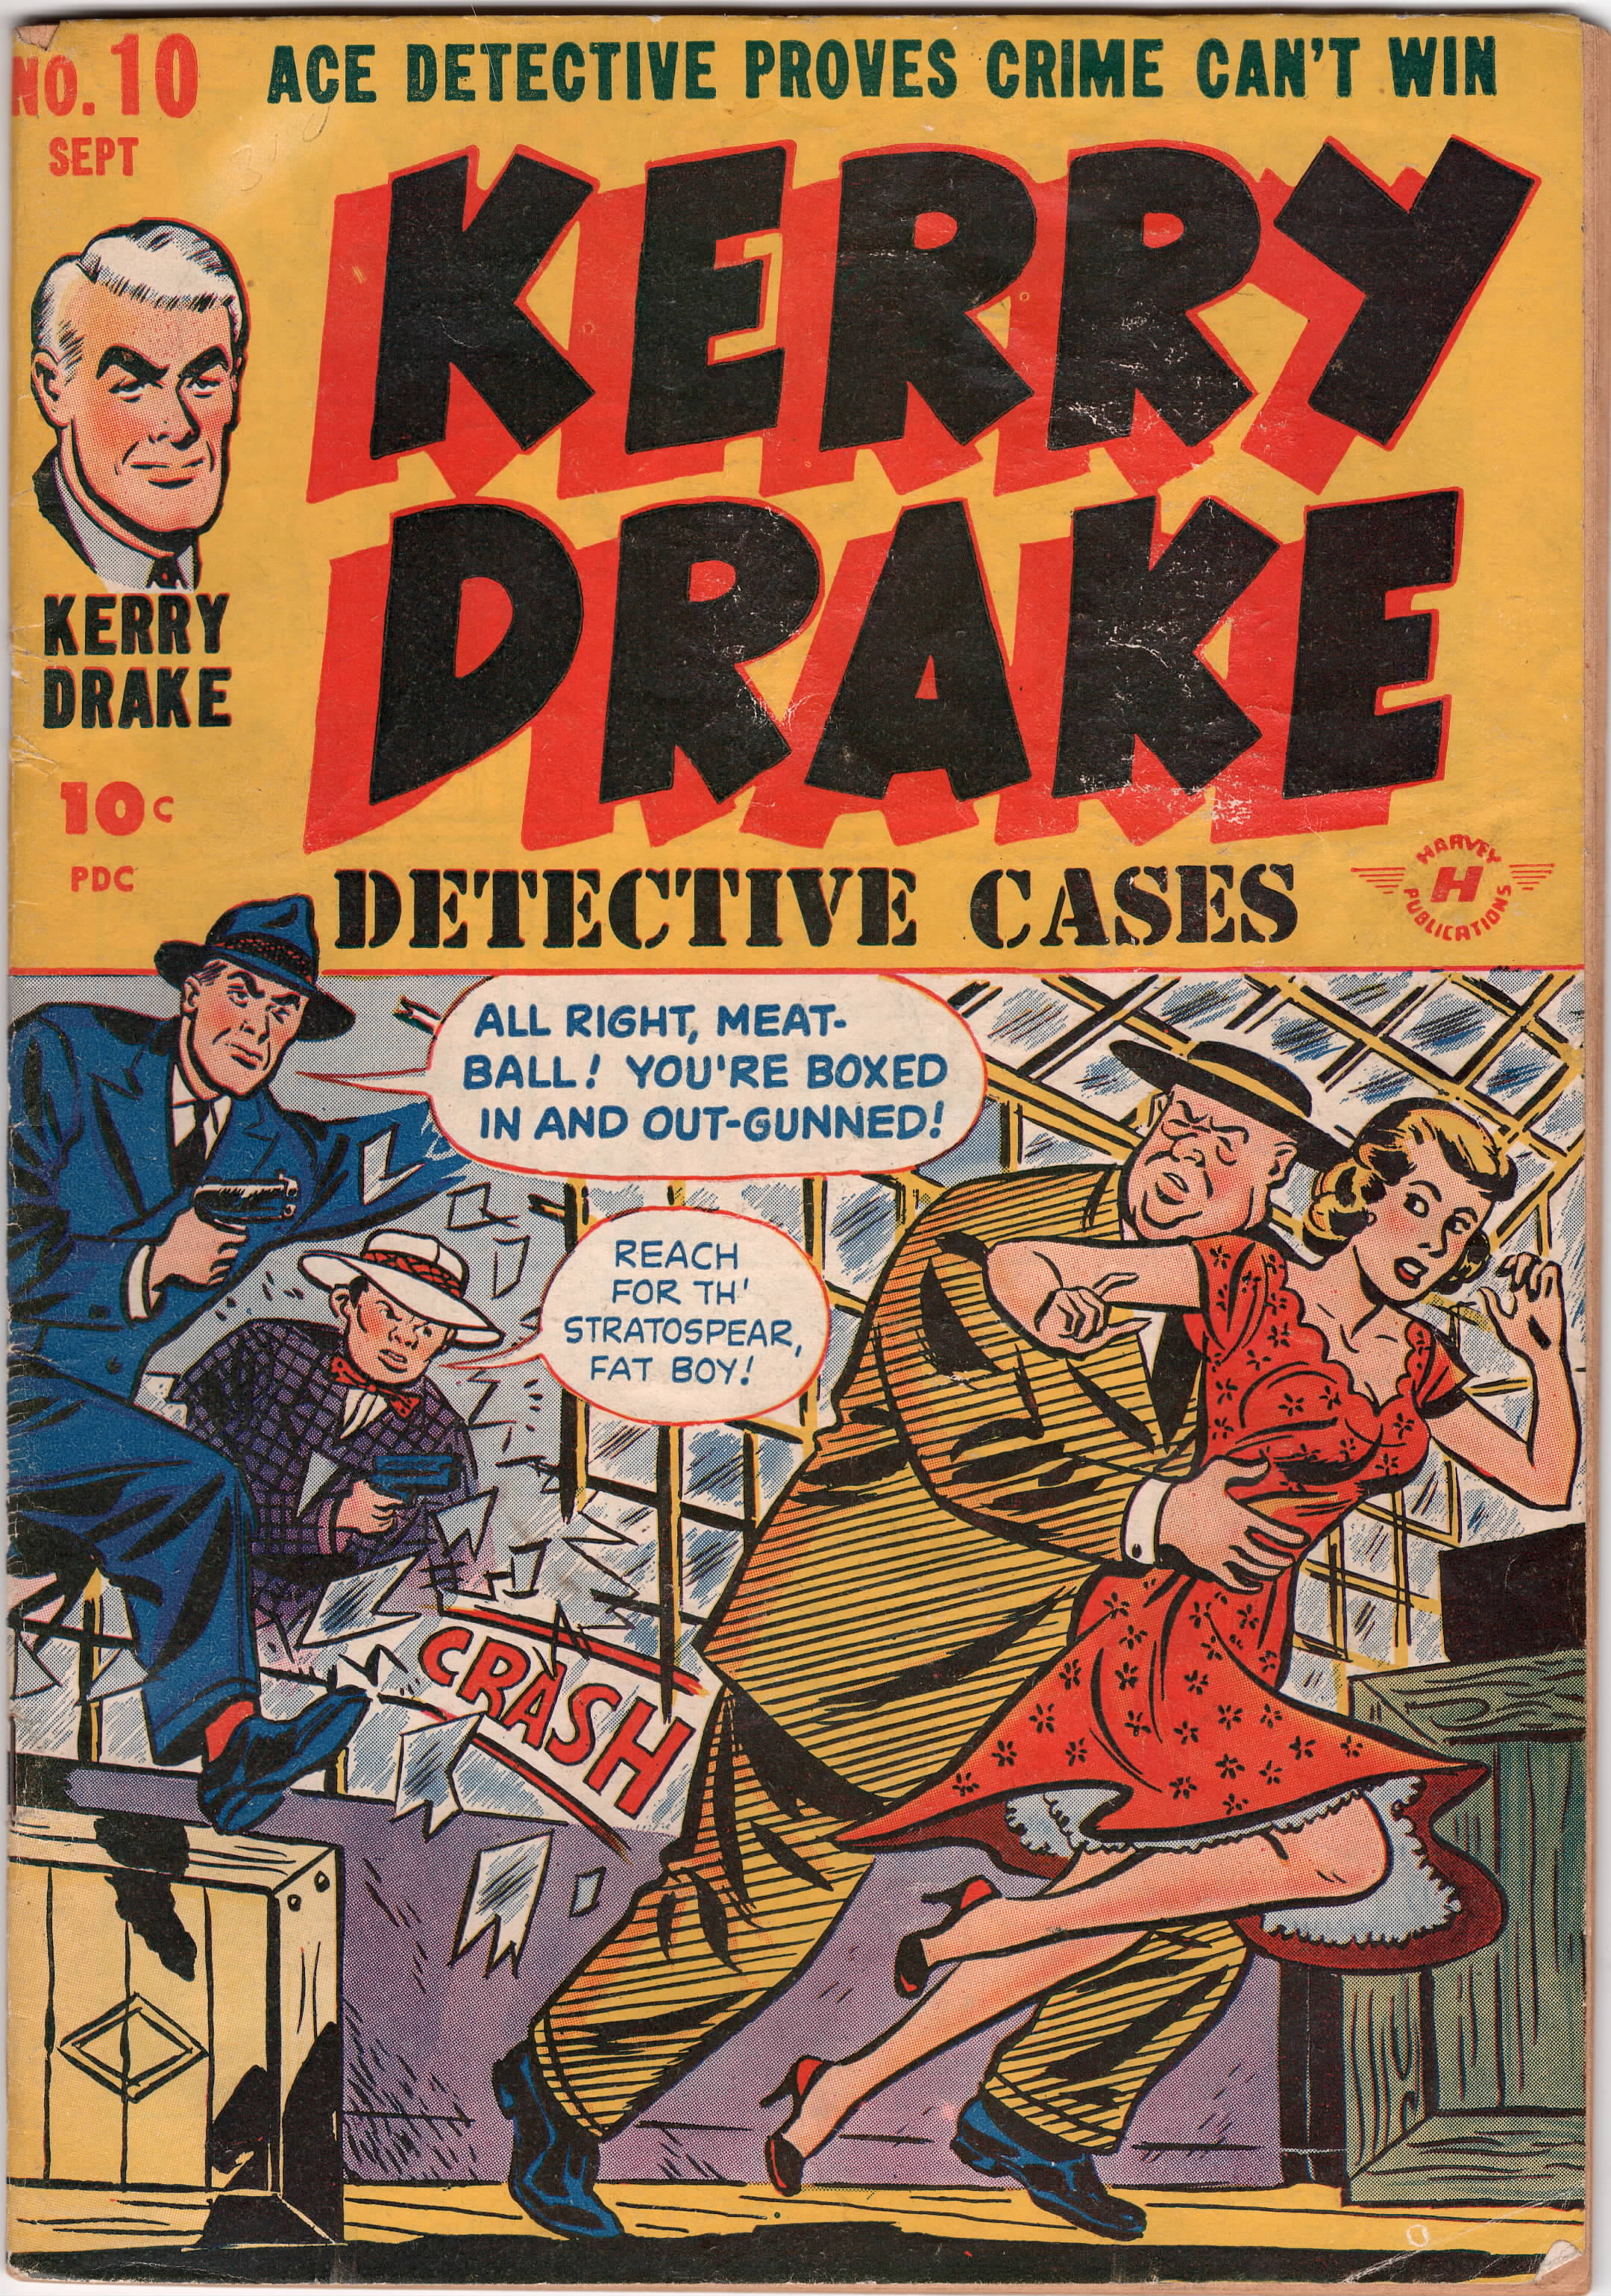 Kerry Drake Detective Cases #10